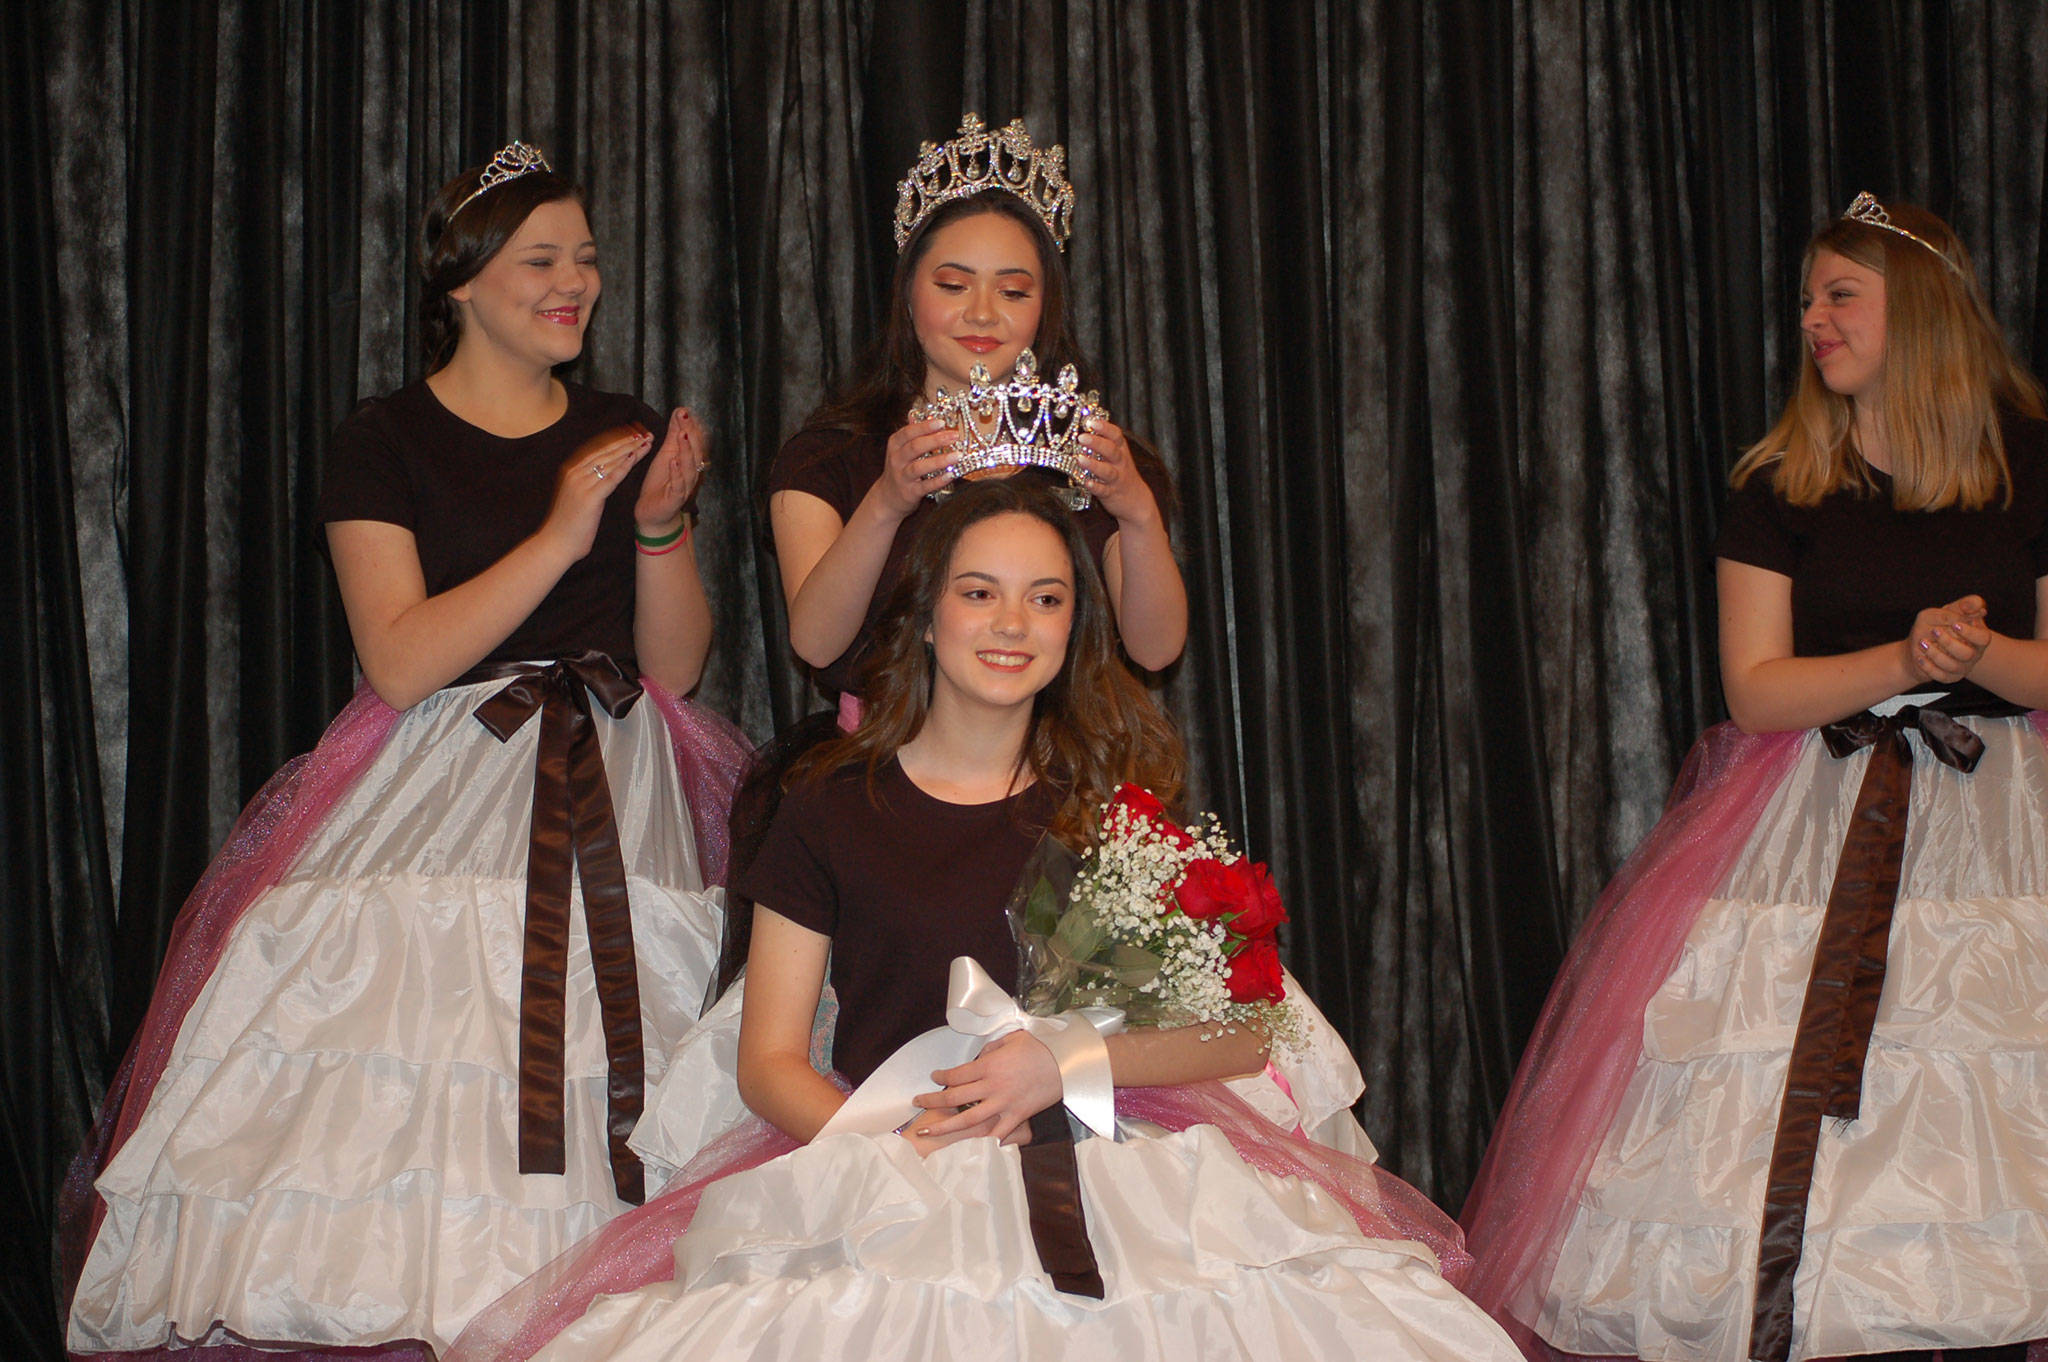 Princess Liliana Williams (foreground) was crowned at the Crazy Daze breakfast by Queen Erin Gordon, center, and joins Princesses Gabi Simonson, left, and Gracelyn Hurdlow on the 2018 Irrigation Festival Royalty Court. Erin Hawkins/Olympic Peninsula News Group